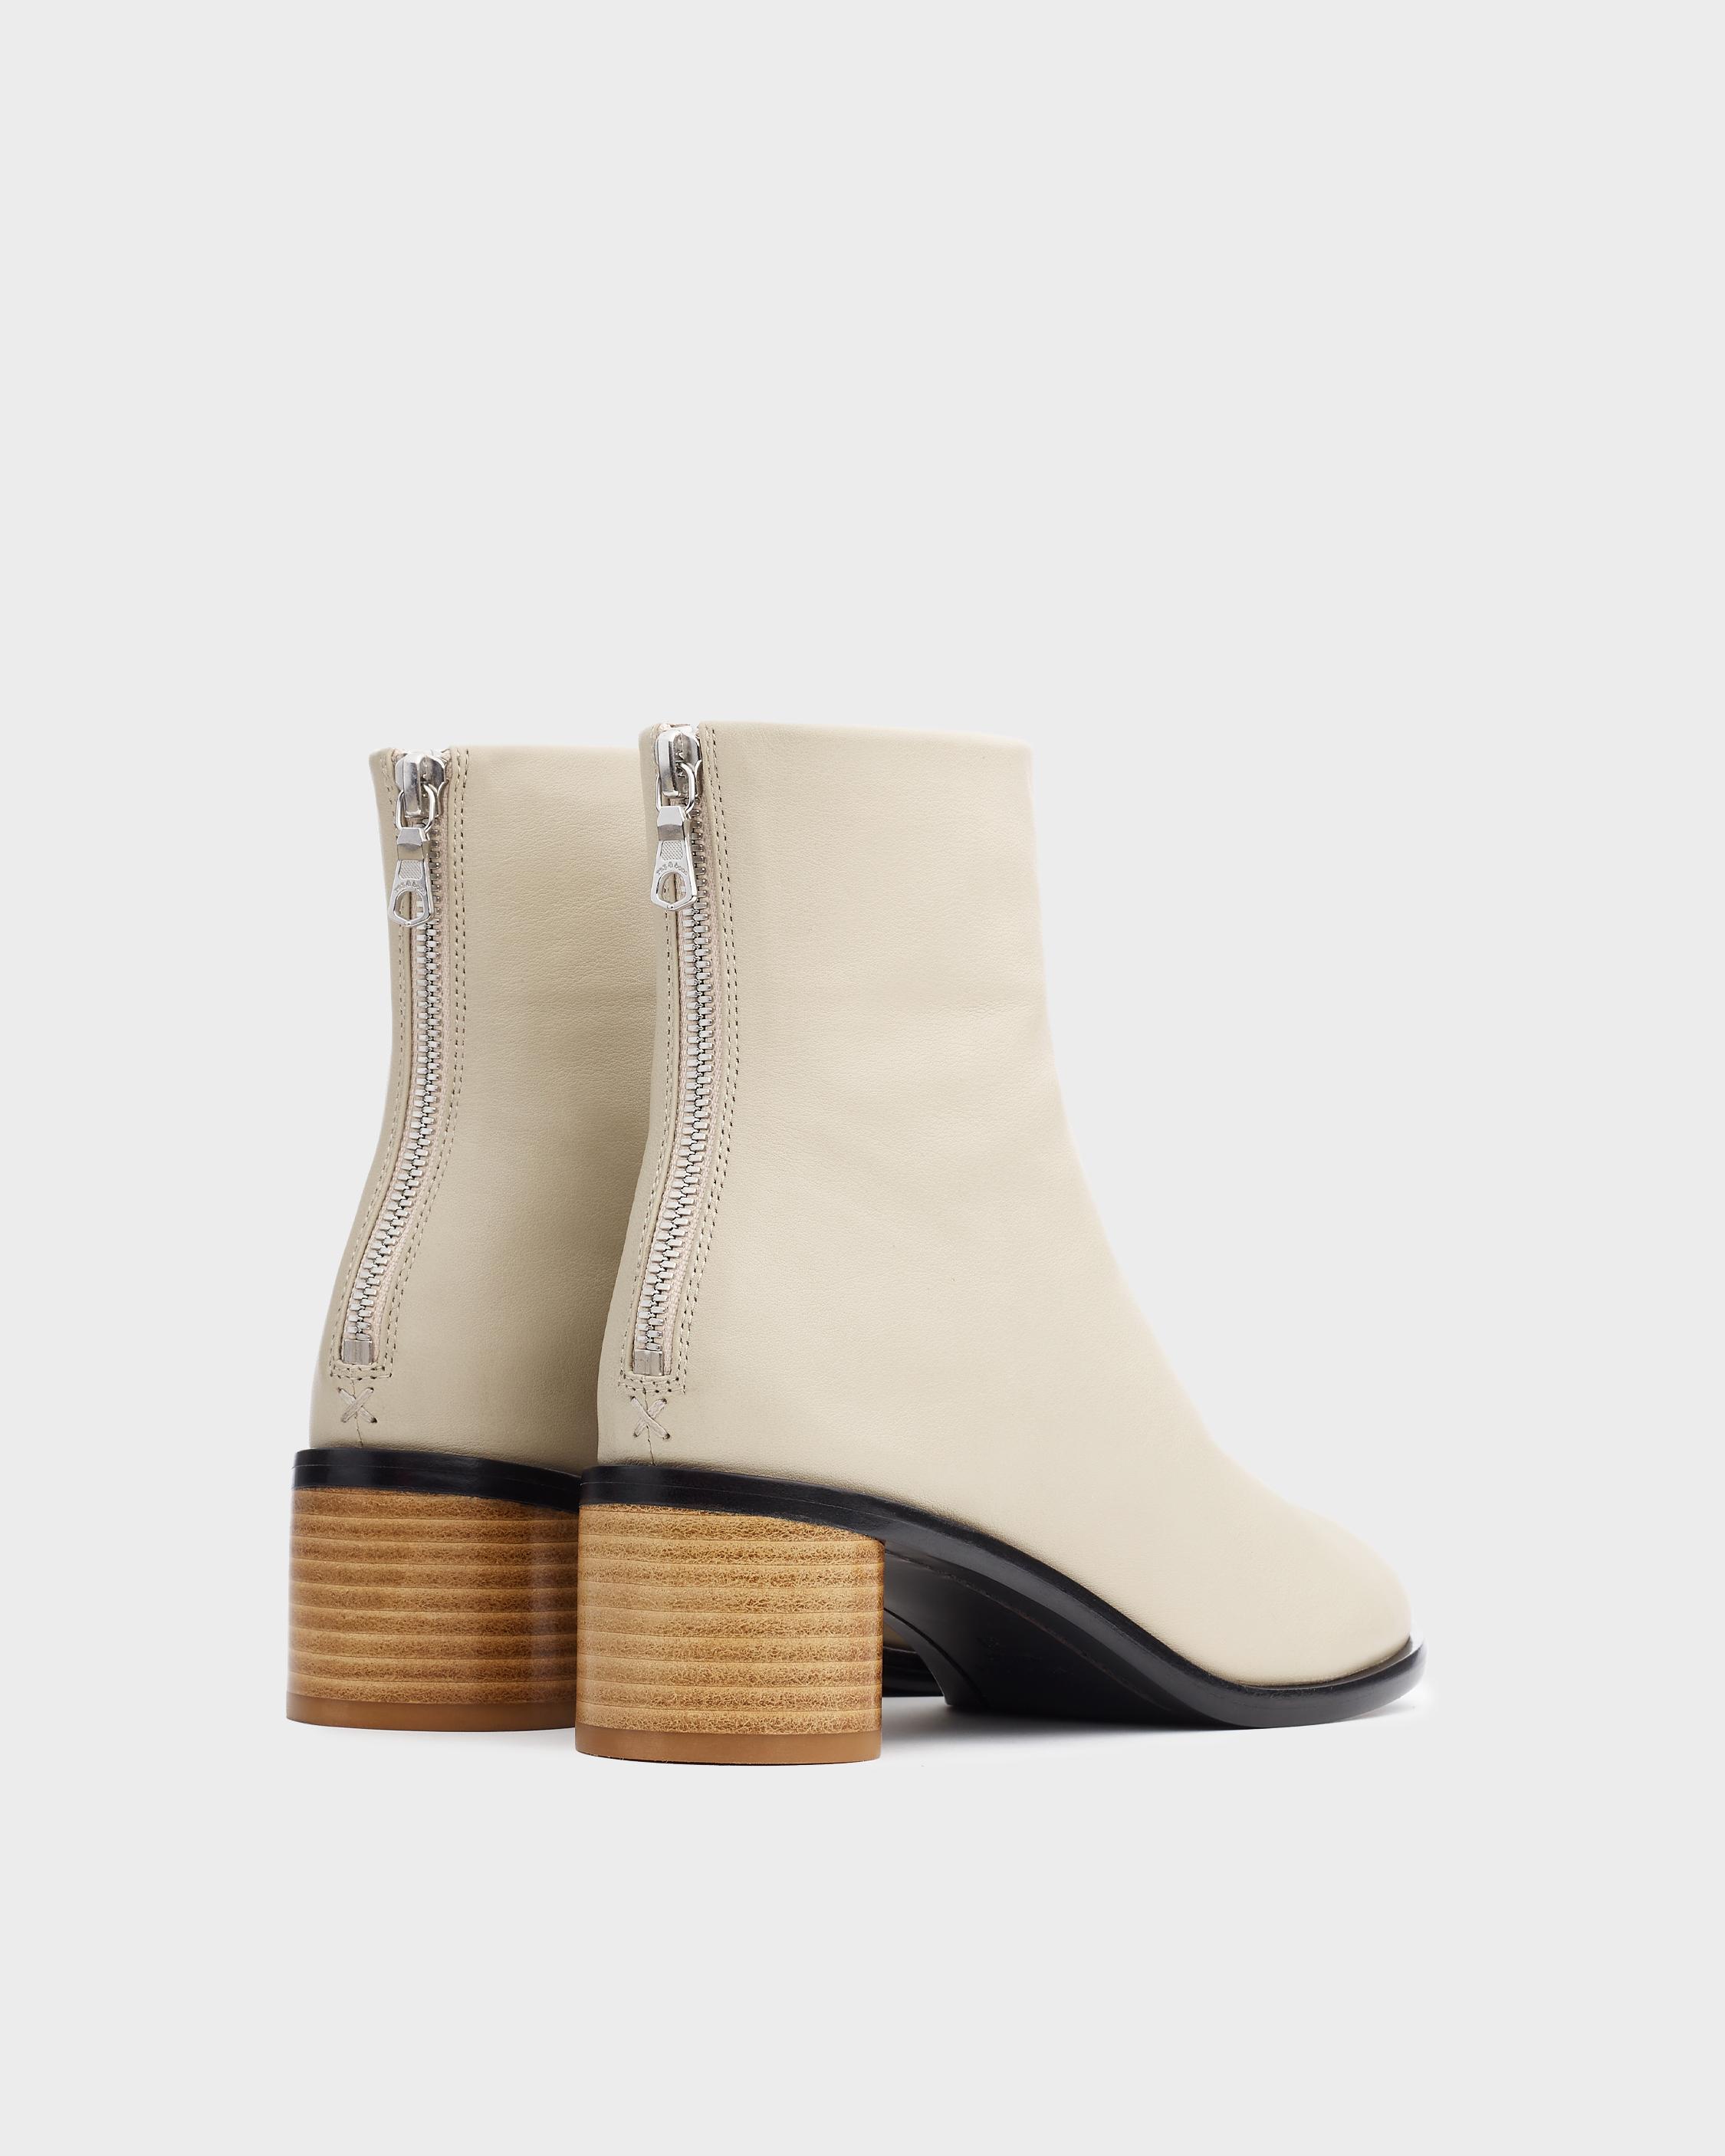 Rag & Bone Ansley Mid Boot - Leather Ankle Boot in Natural - Save 